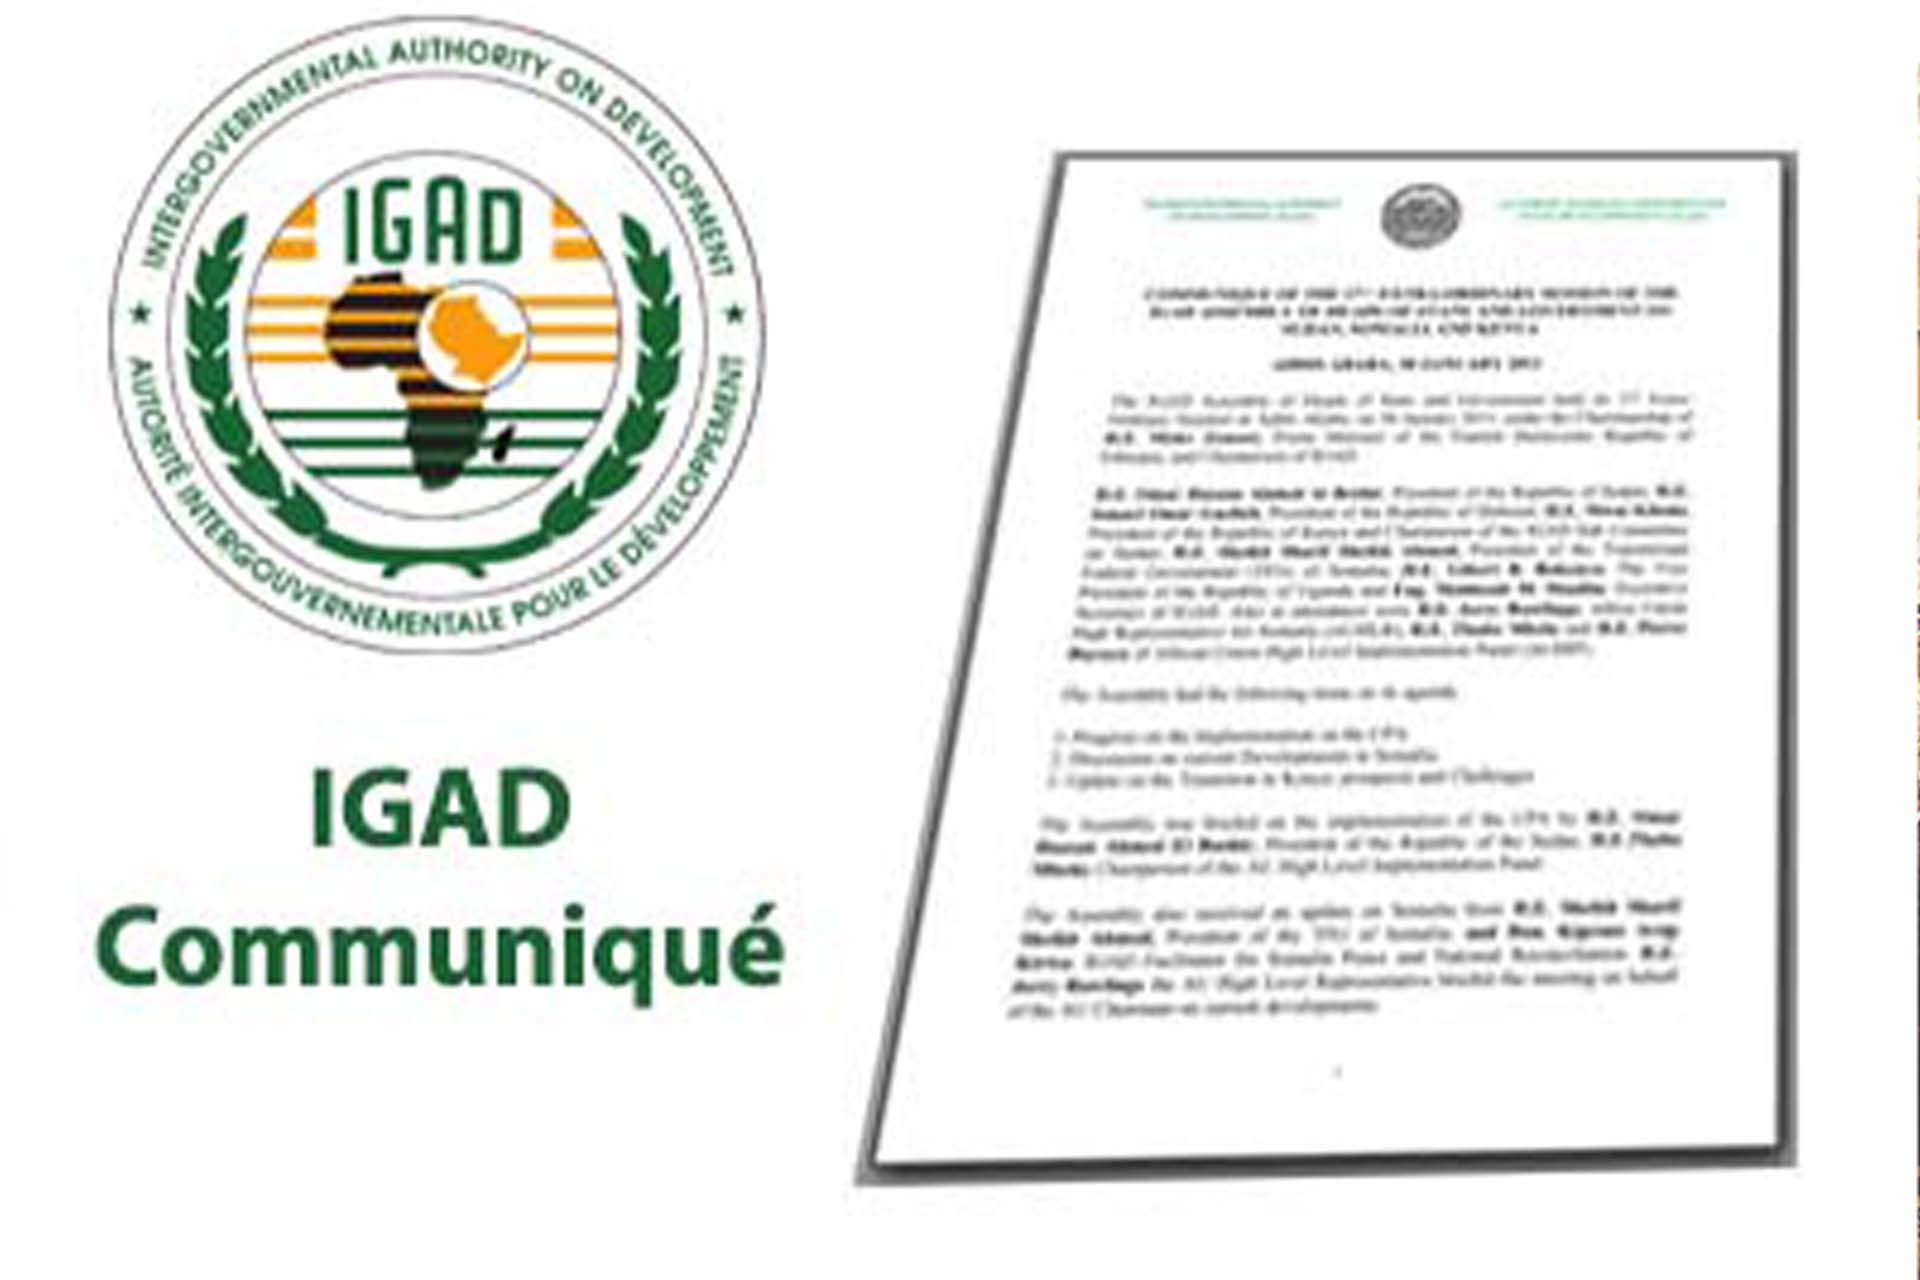 Press Release: Visit of IGAD Ministers and ES to Eritrea